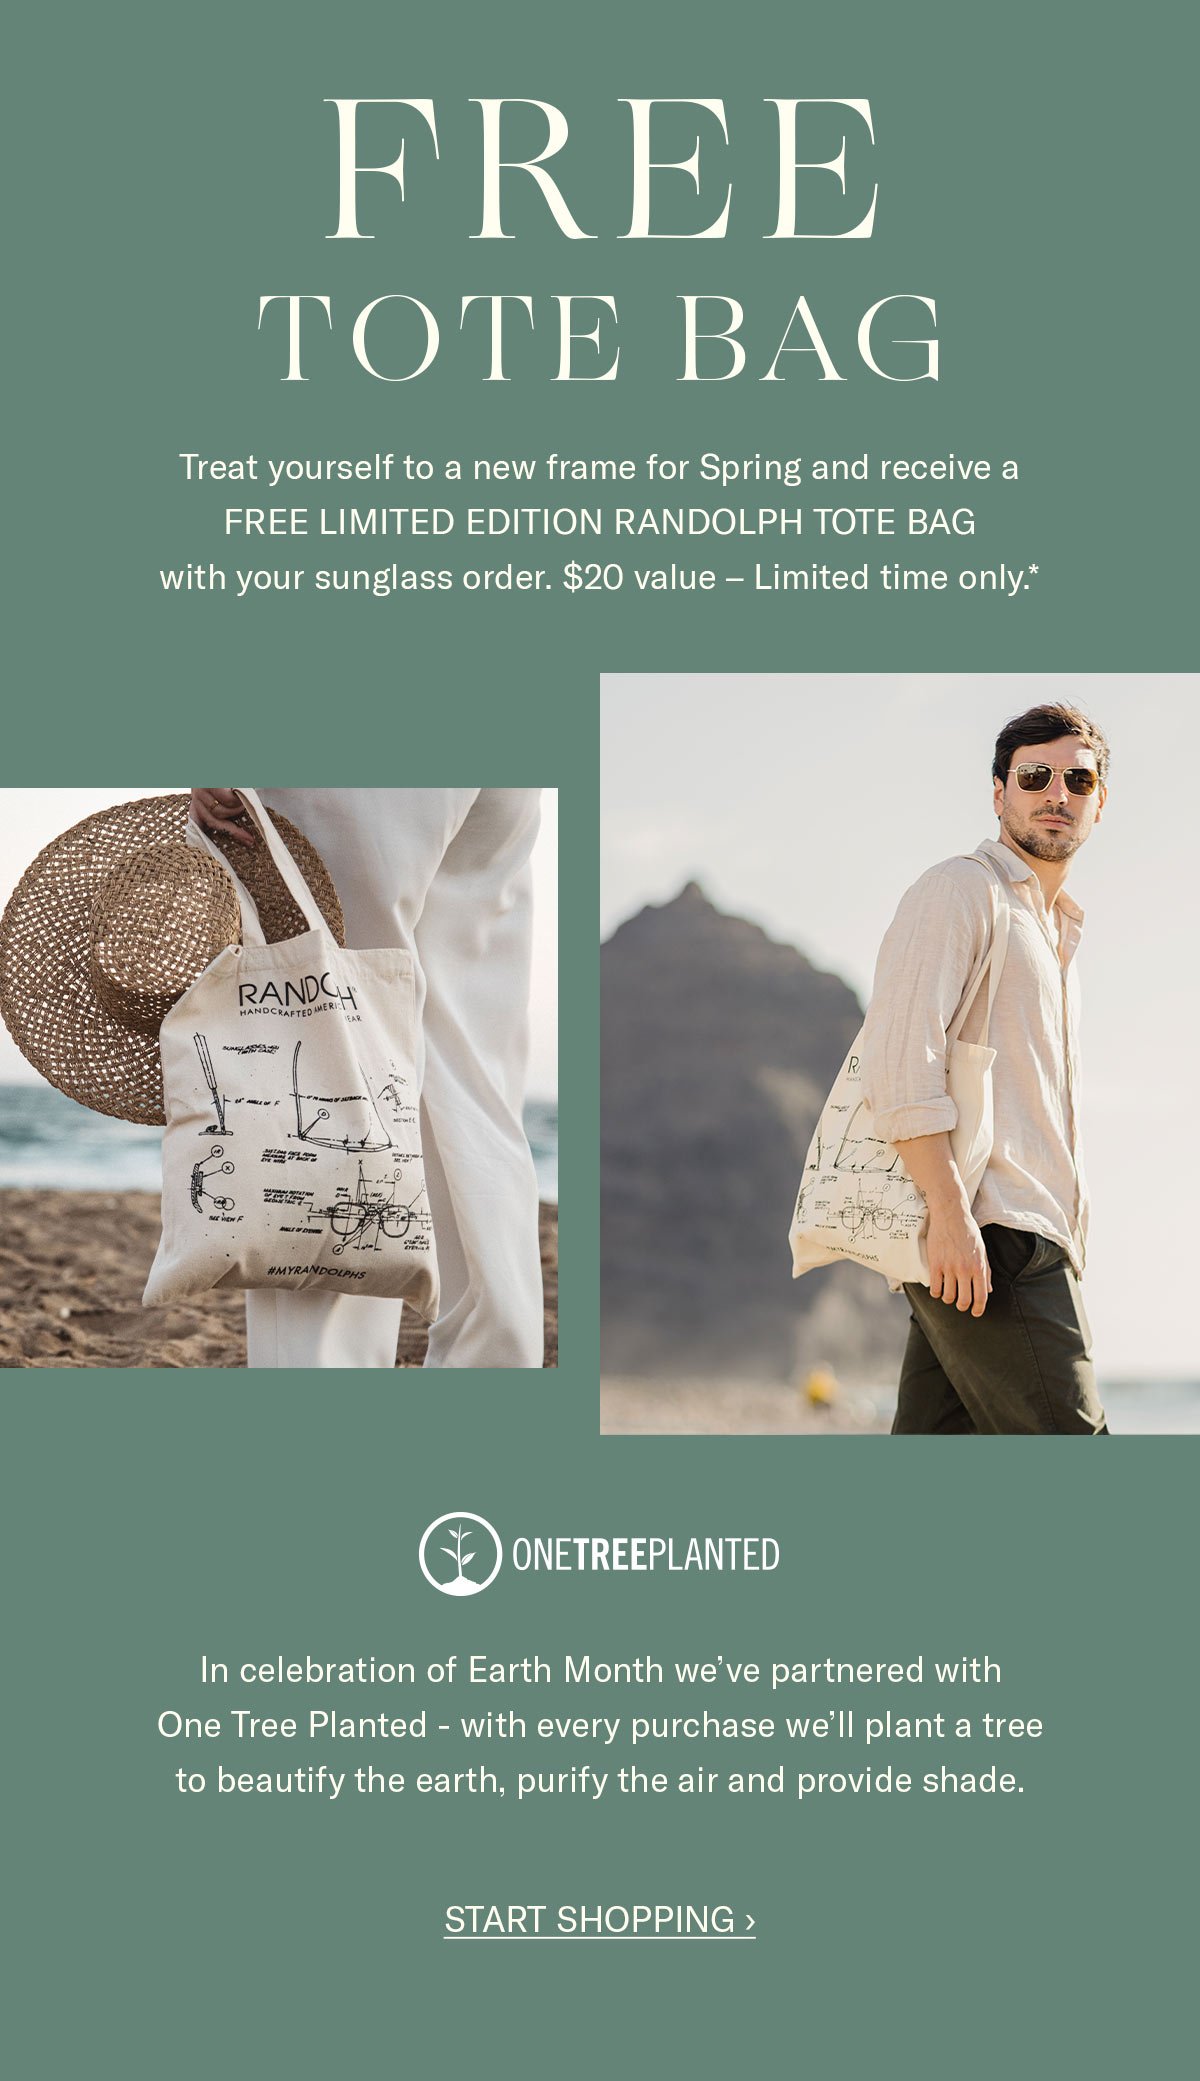 FREE TOTE BAG - Treat yourself to a new frame for Spring and receive a FREE TOTE BAG with your sunglass order.*